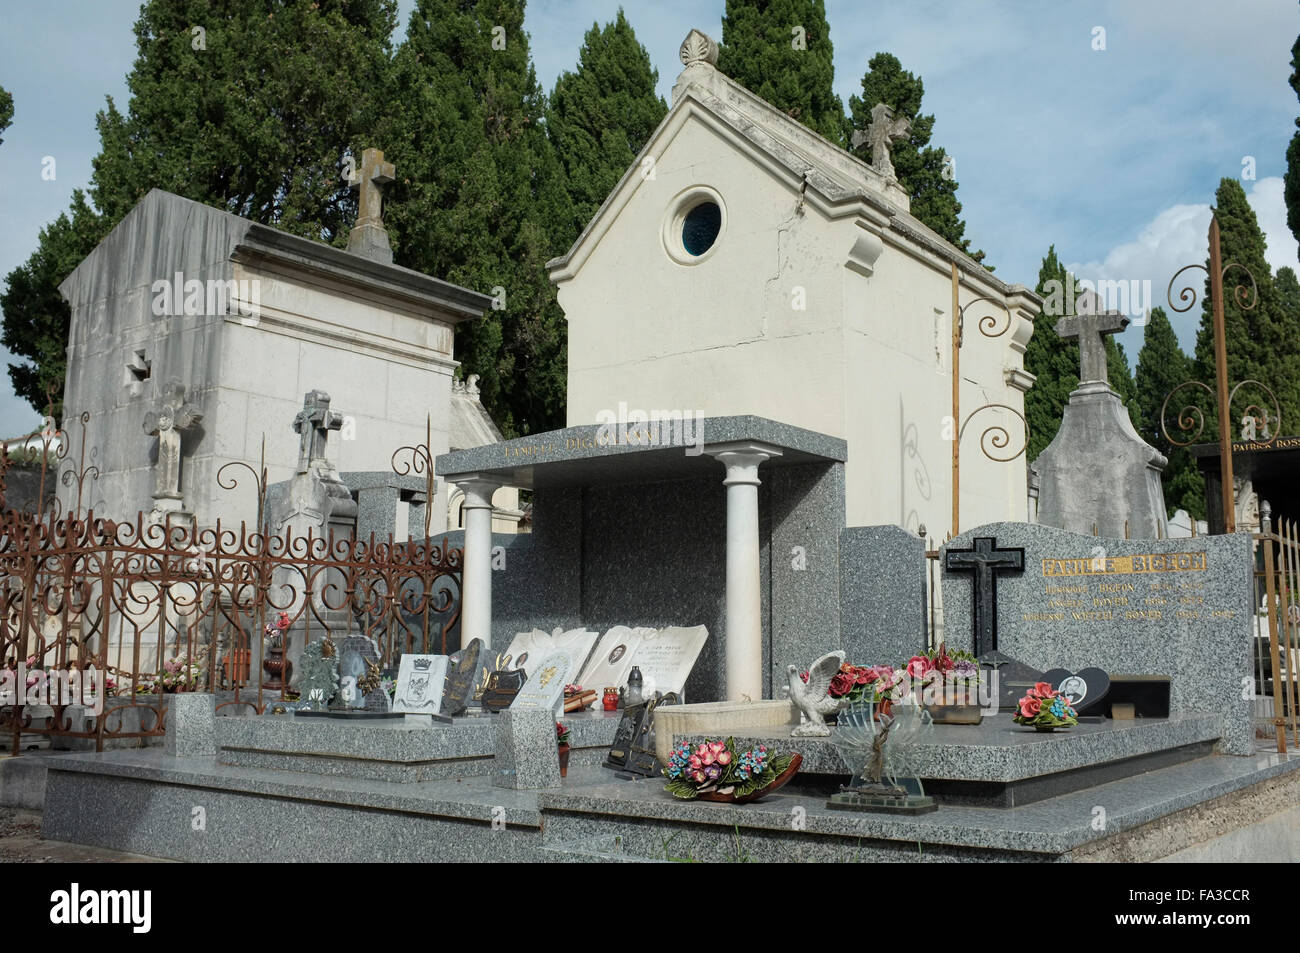 Ornate graves and family vaults at the municipal cemetery in Draguignan, Provence, France. Stock Photo